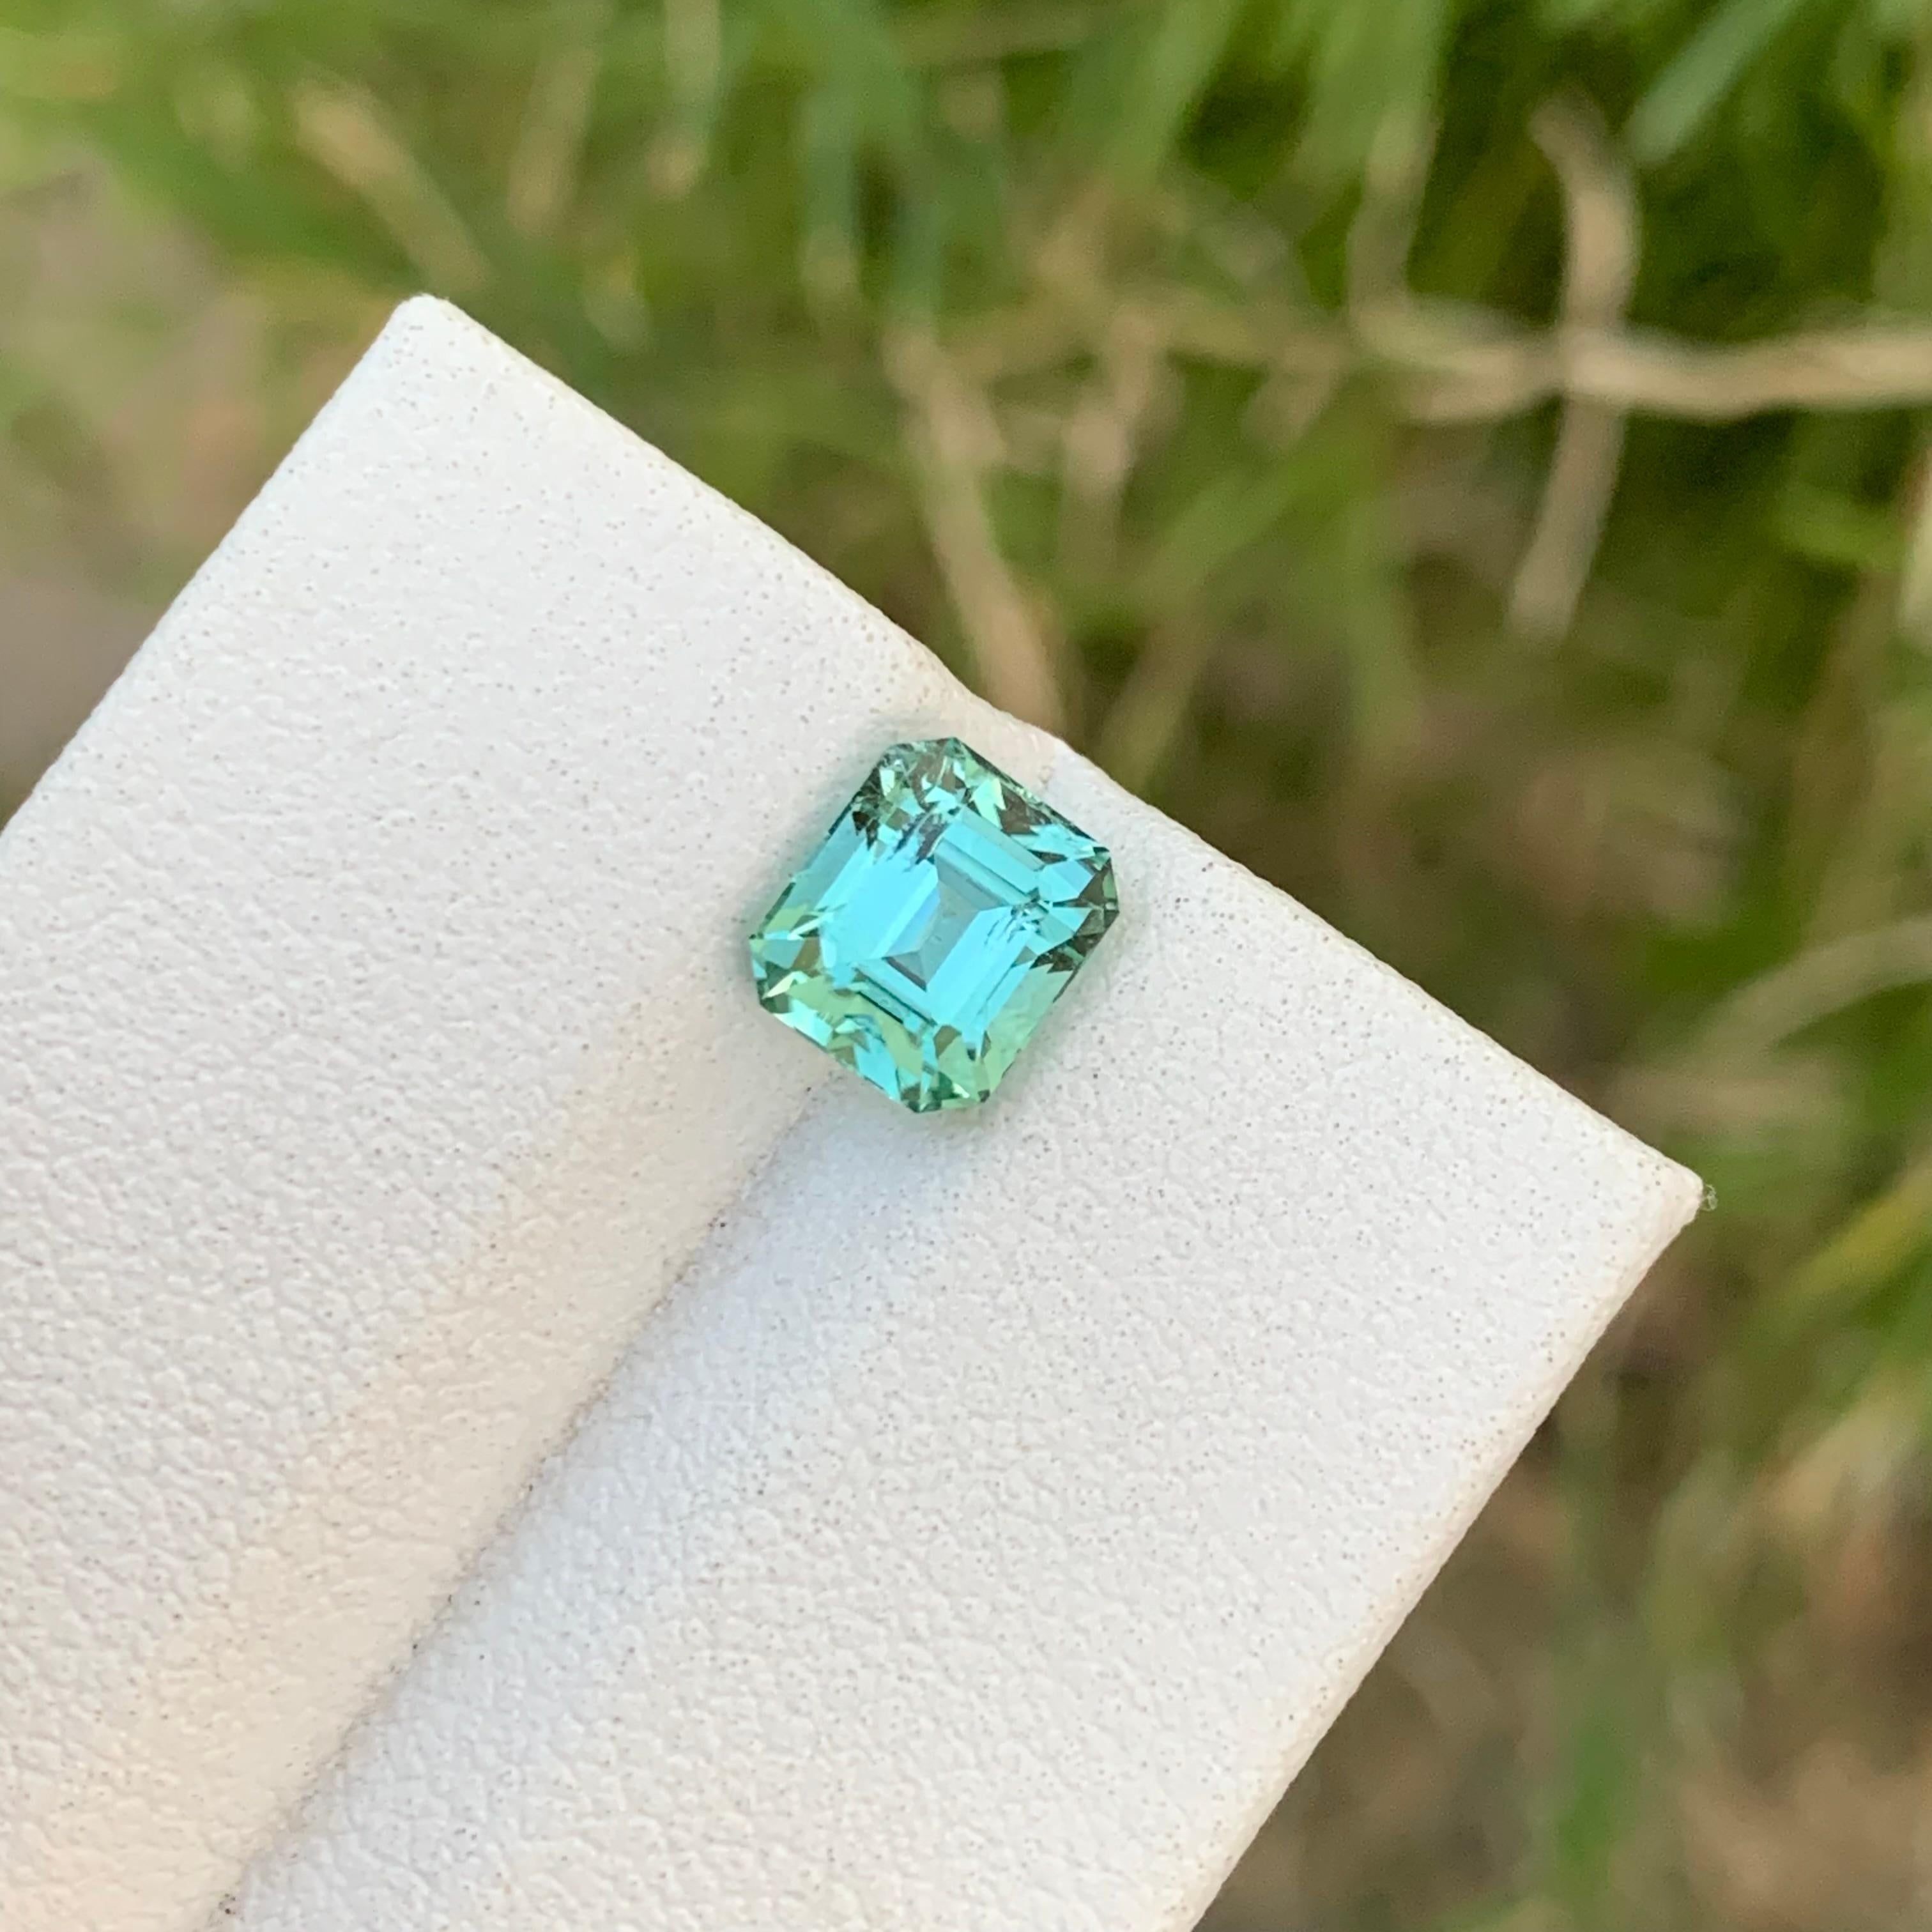 Loose Tourmaline
Weight: 1.65 Carats
Dimension: 6.7 x 5.8 x 5 Mm
Origin: Kunar Afghanistan
Shape: Emerald
Color: Mint Green
Treatment: Non
Certificate: On Demand

Mint green tourmaline, with its delicate hue reminiscent of fresh spring foliage,